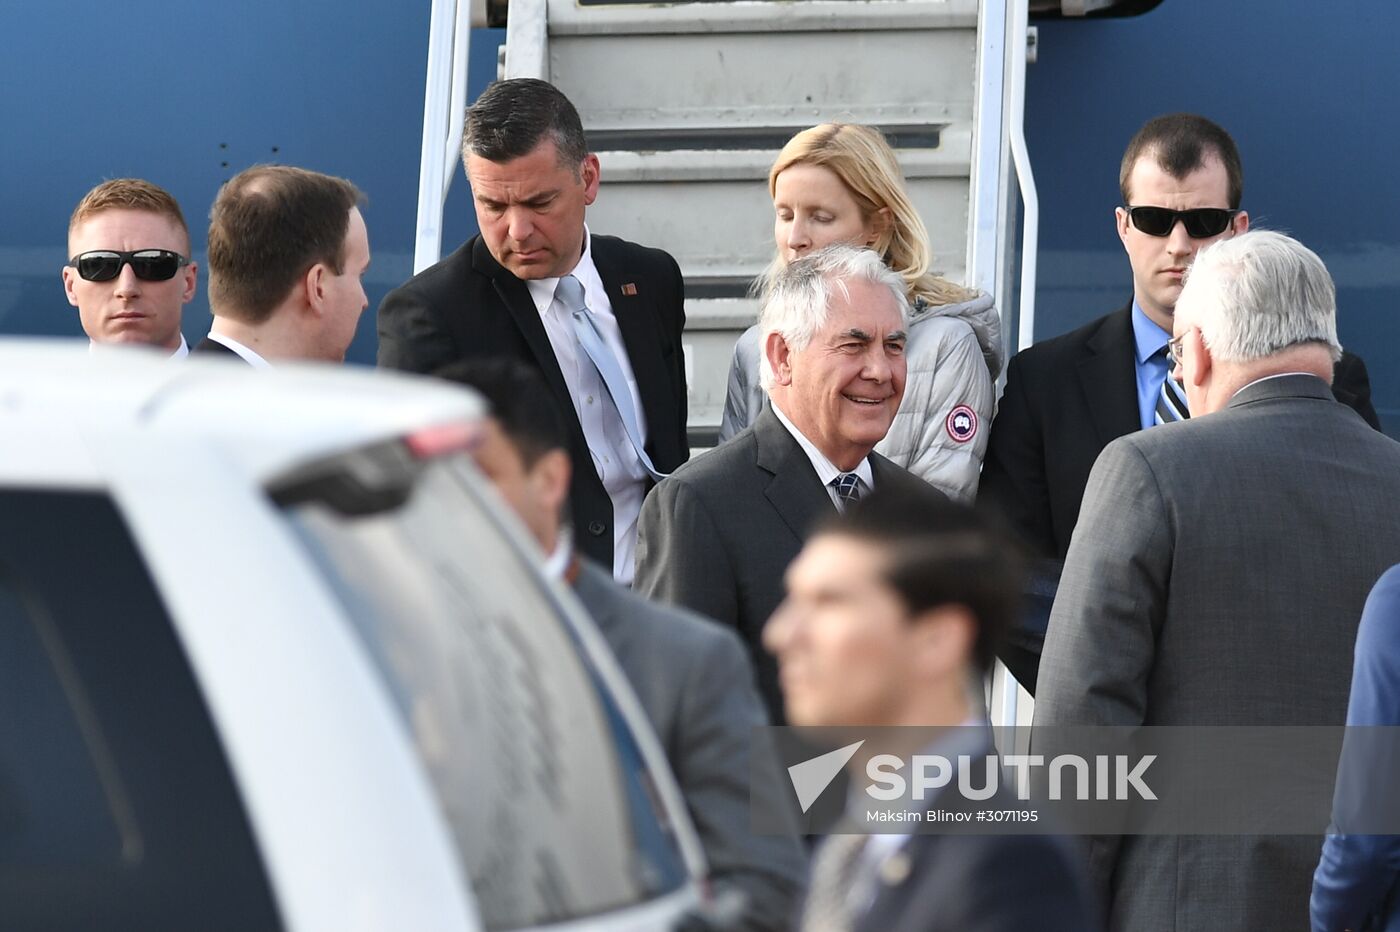 US Secretary of State Rex Tillerson arrives on a working visit to Russia